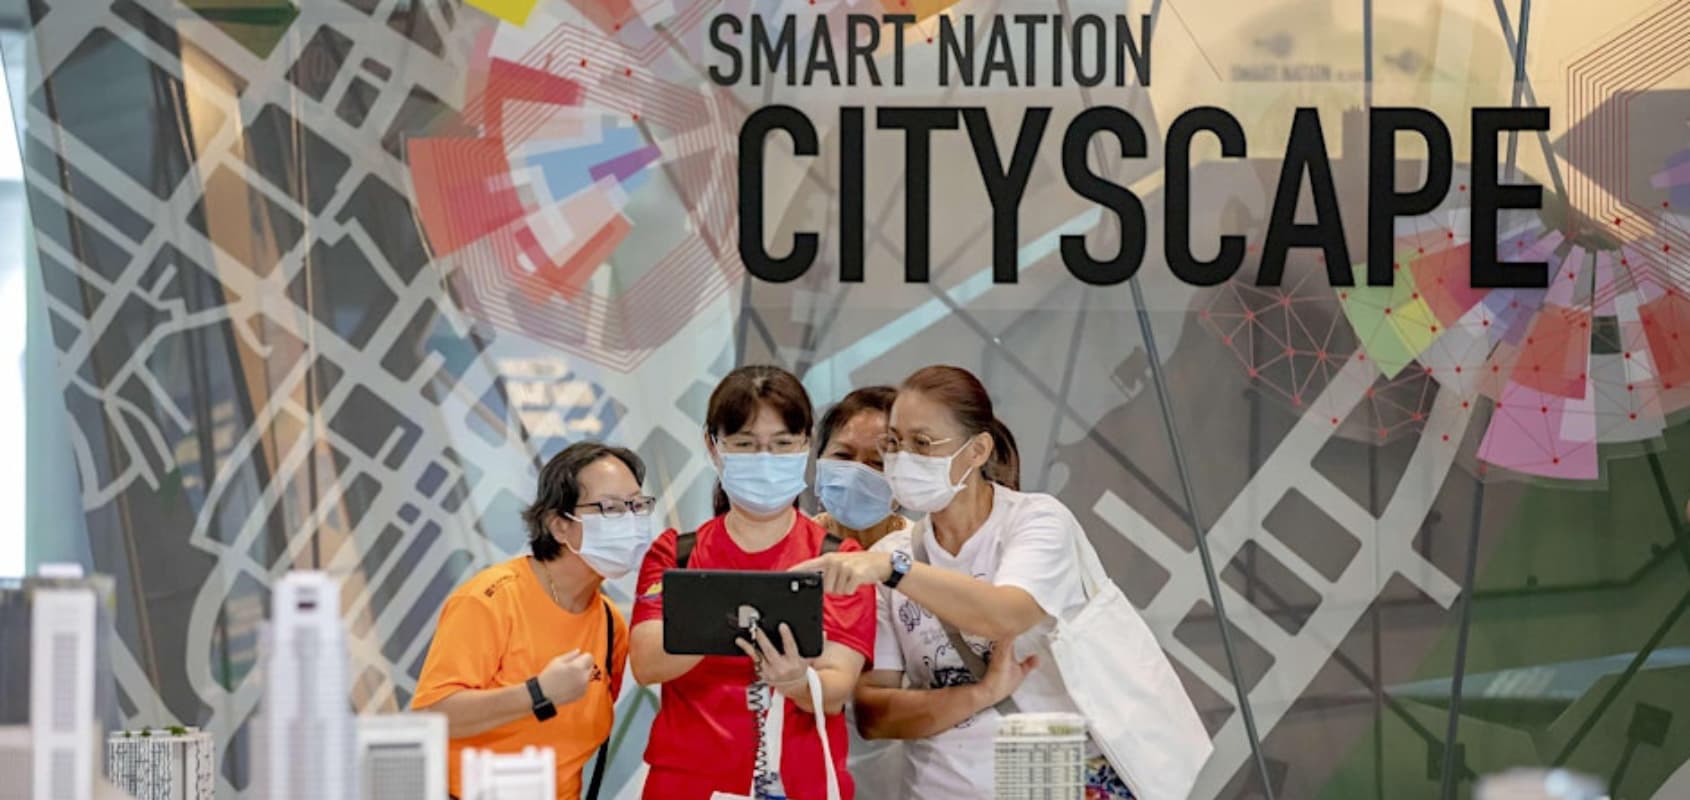 Learn about the latest technologies and upcoming developments to transform SG into a smart nation